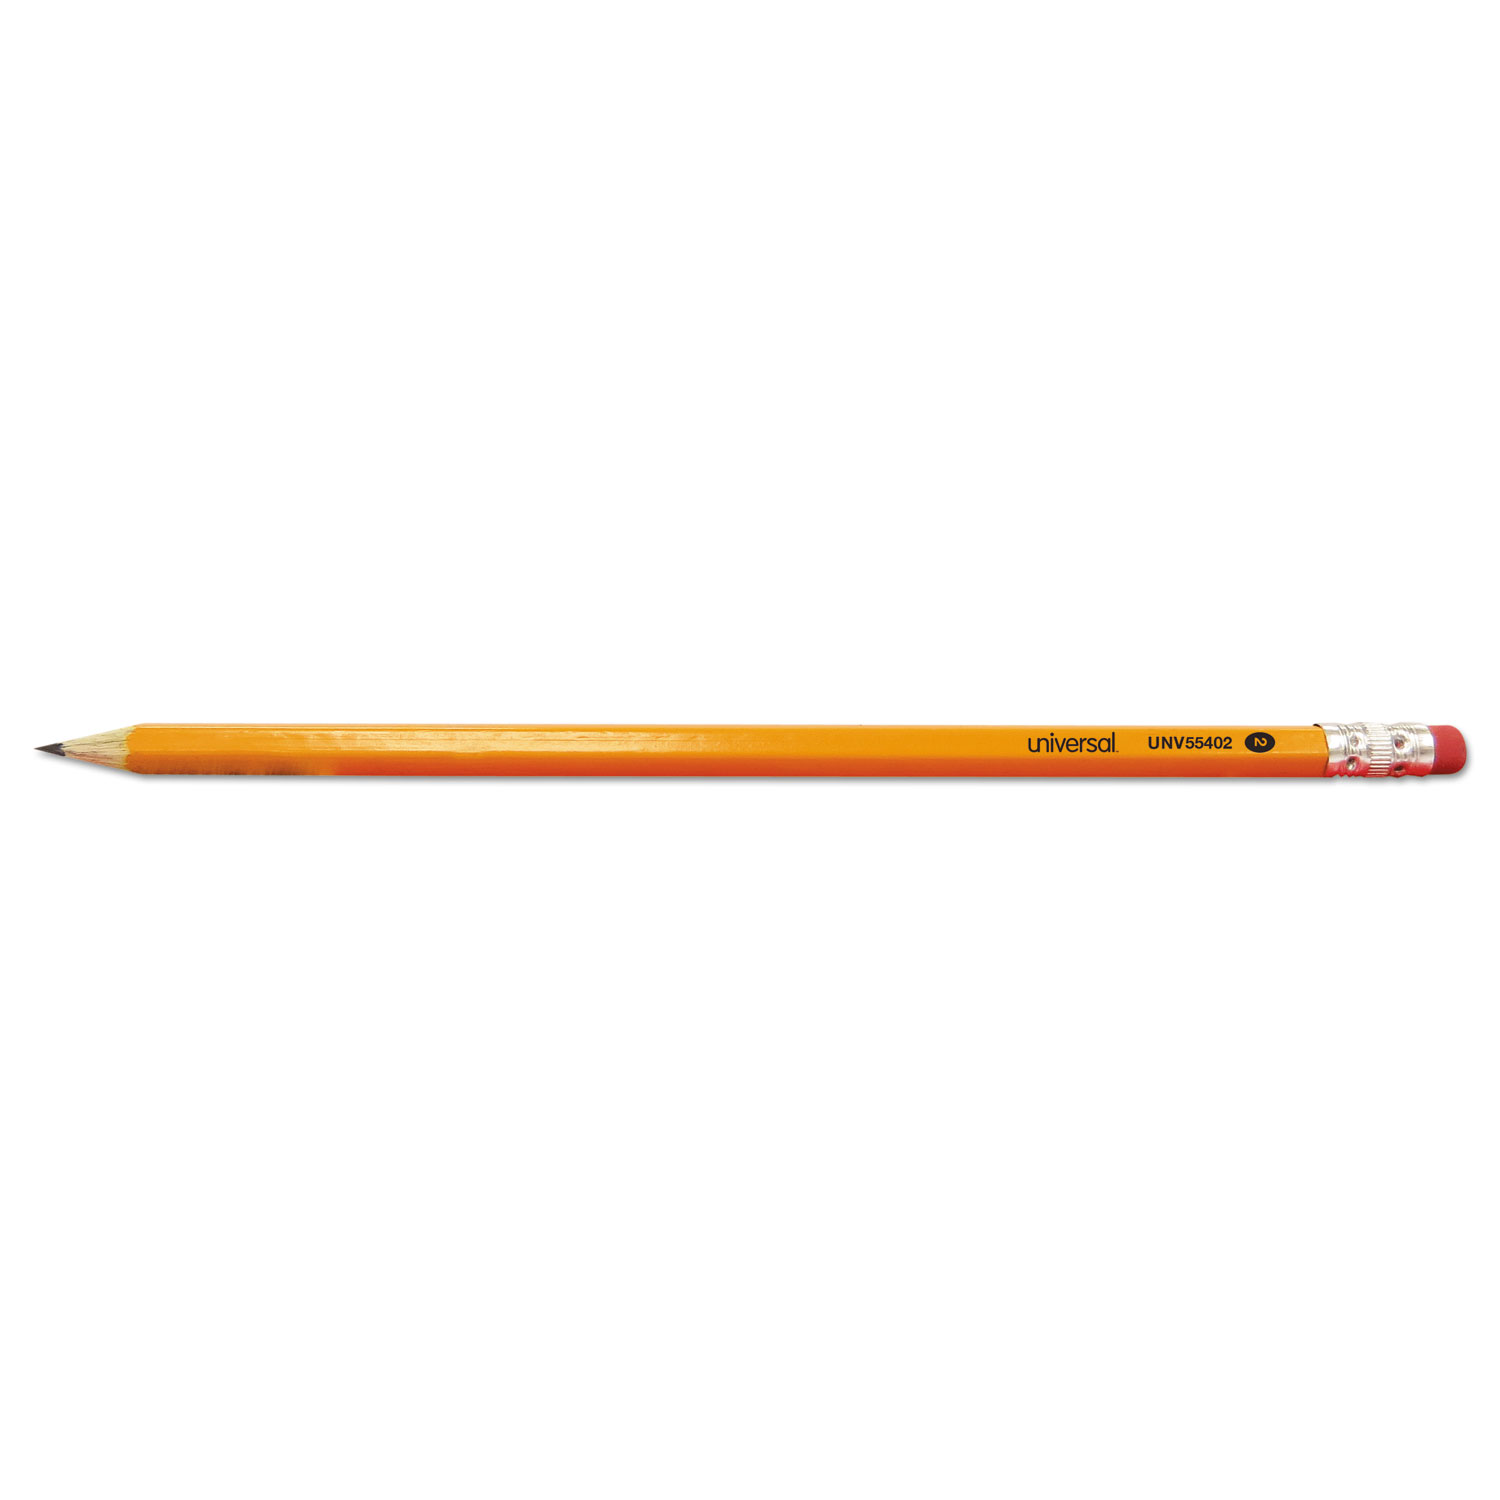  Universal UNV55402 #2 Pre-Sharpened Woodcase Pencil, HB (#2), Black Lead, Yellow Barrel, 72/Pack (UNV55402) 